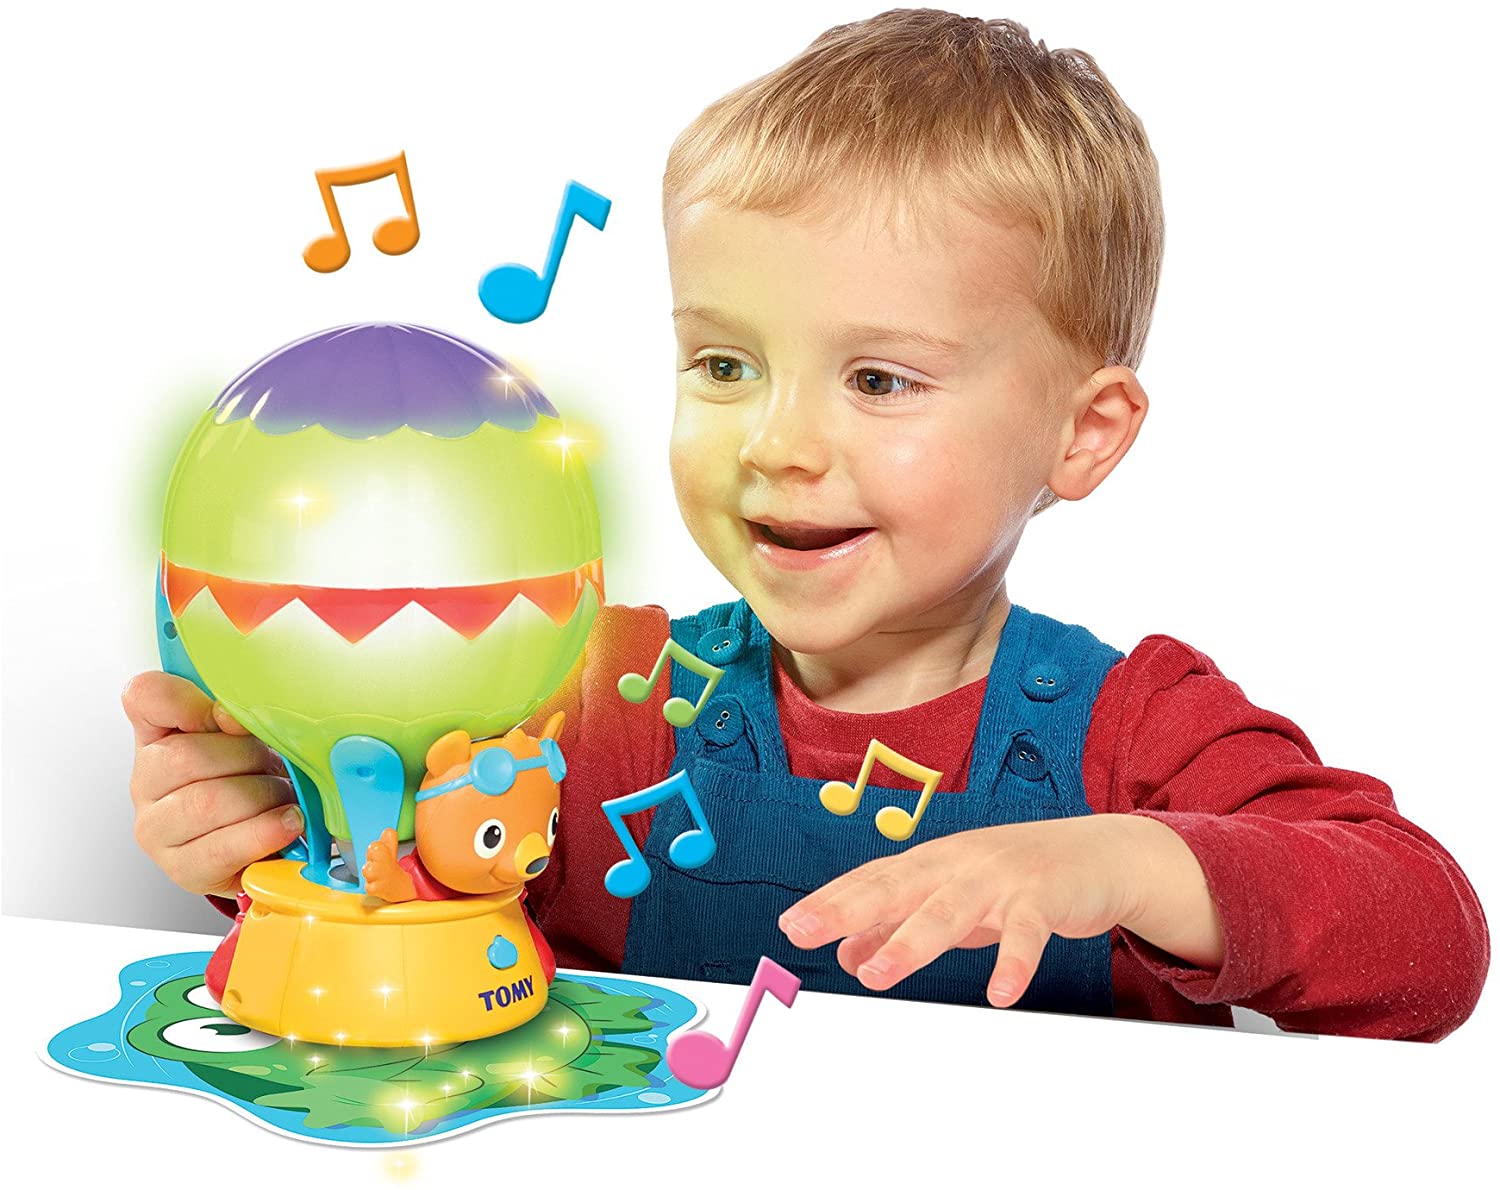 Tomy Discovery Hot Air Balloon